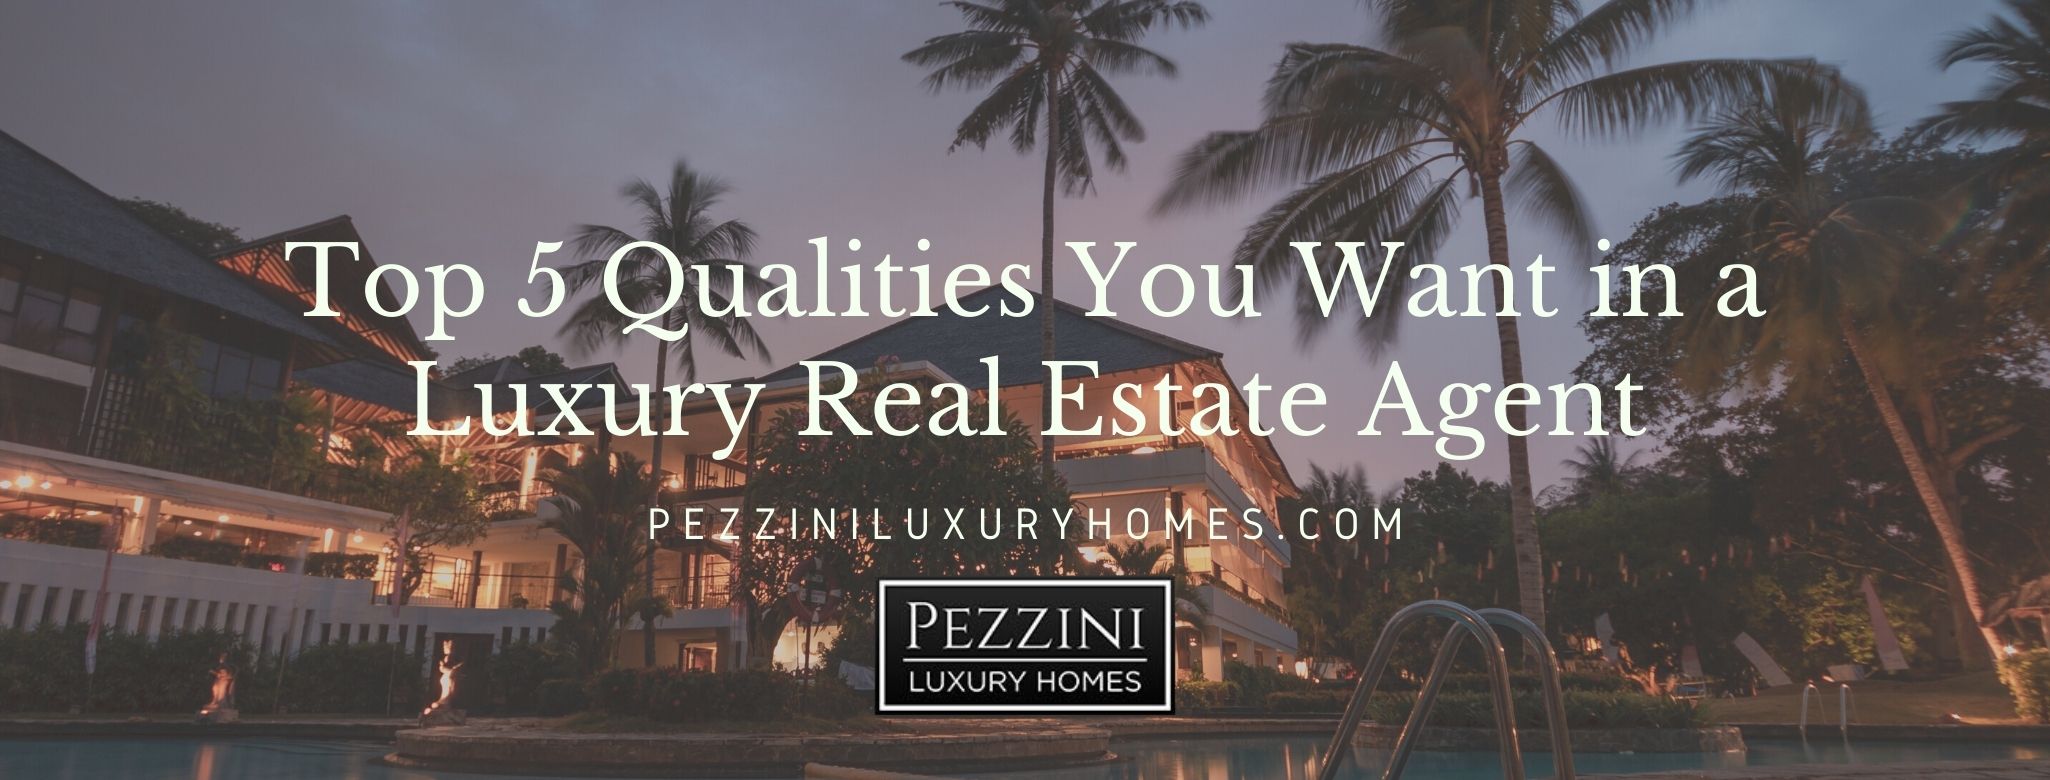 luxury real estate agent, Top 5 Qualities You Want in a Luxury Real Estate Agent